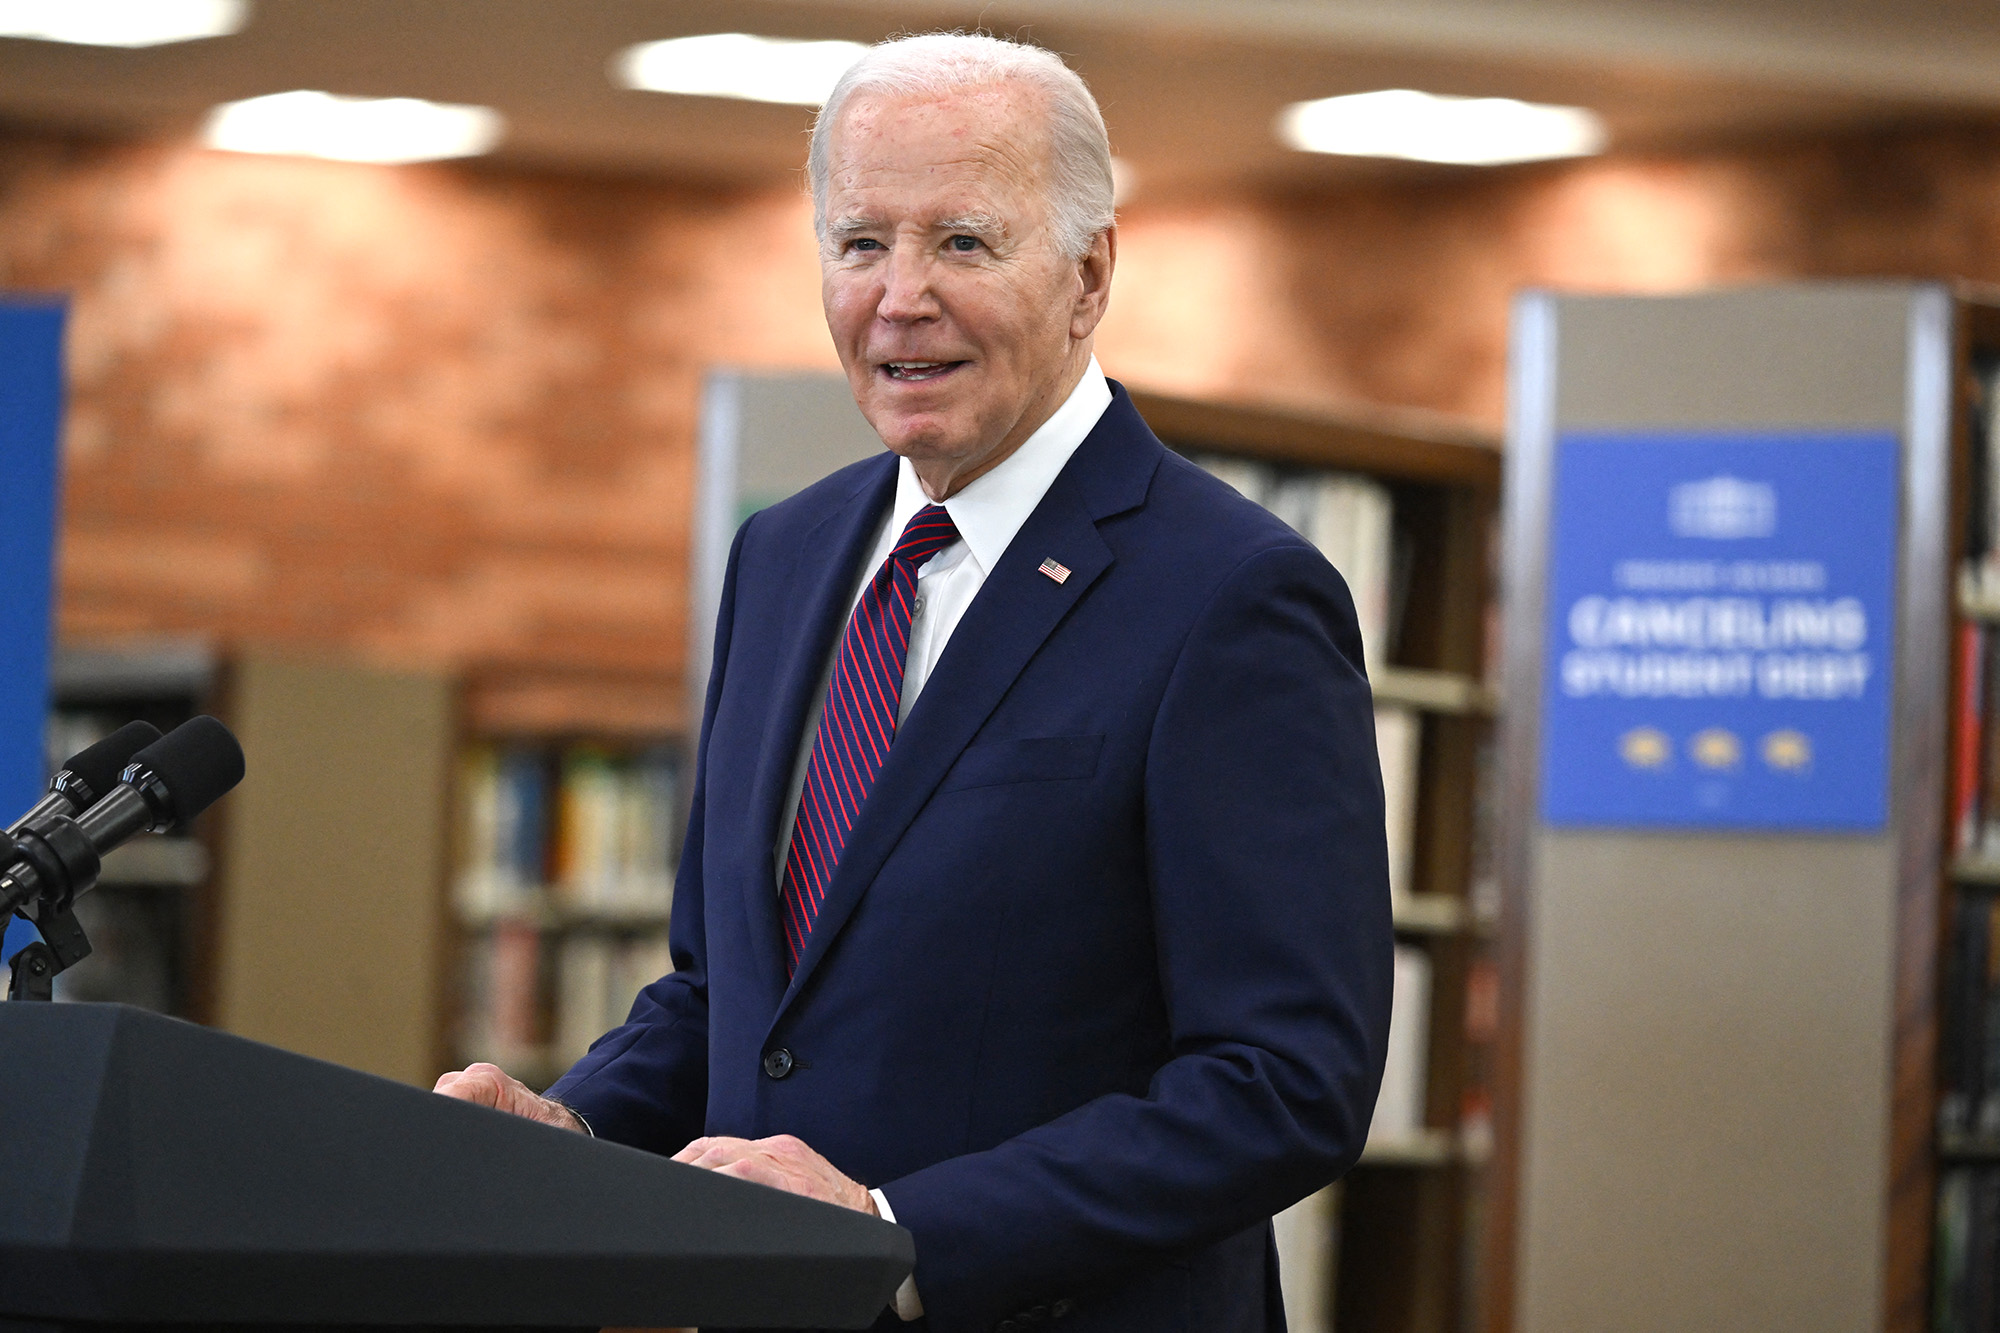 US President Joe Biden speaks during an event at the Julian Dixon Library in Culver City, California on February 21.